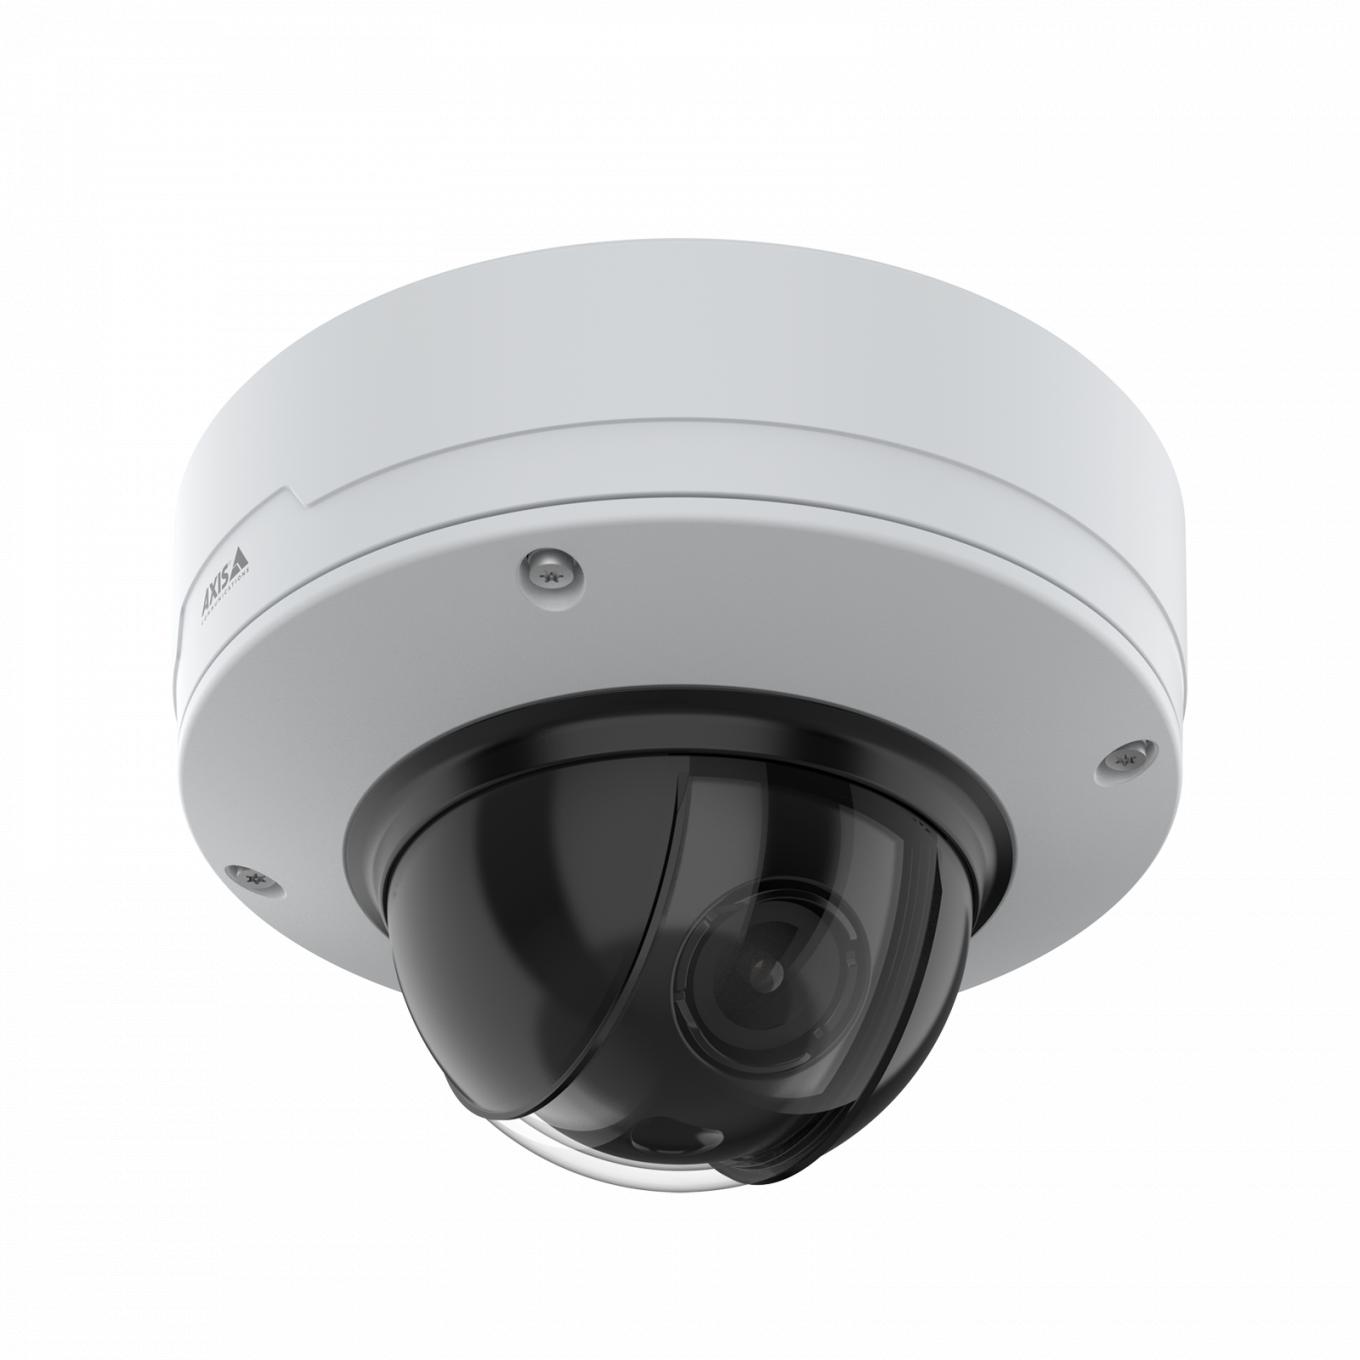 AXIS Q3538-LVE Dome Camera, celing mounted, viewed from its right agle